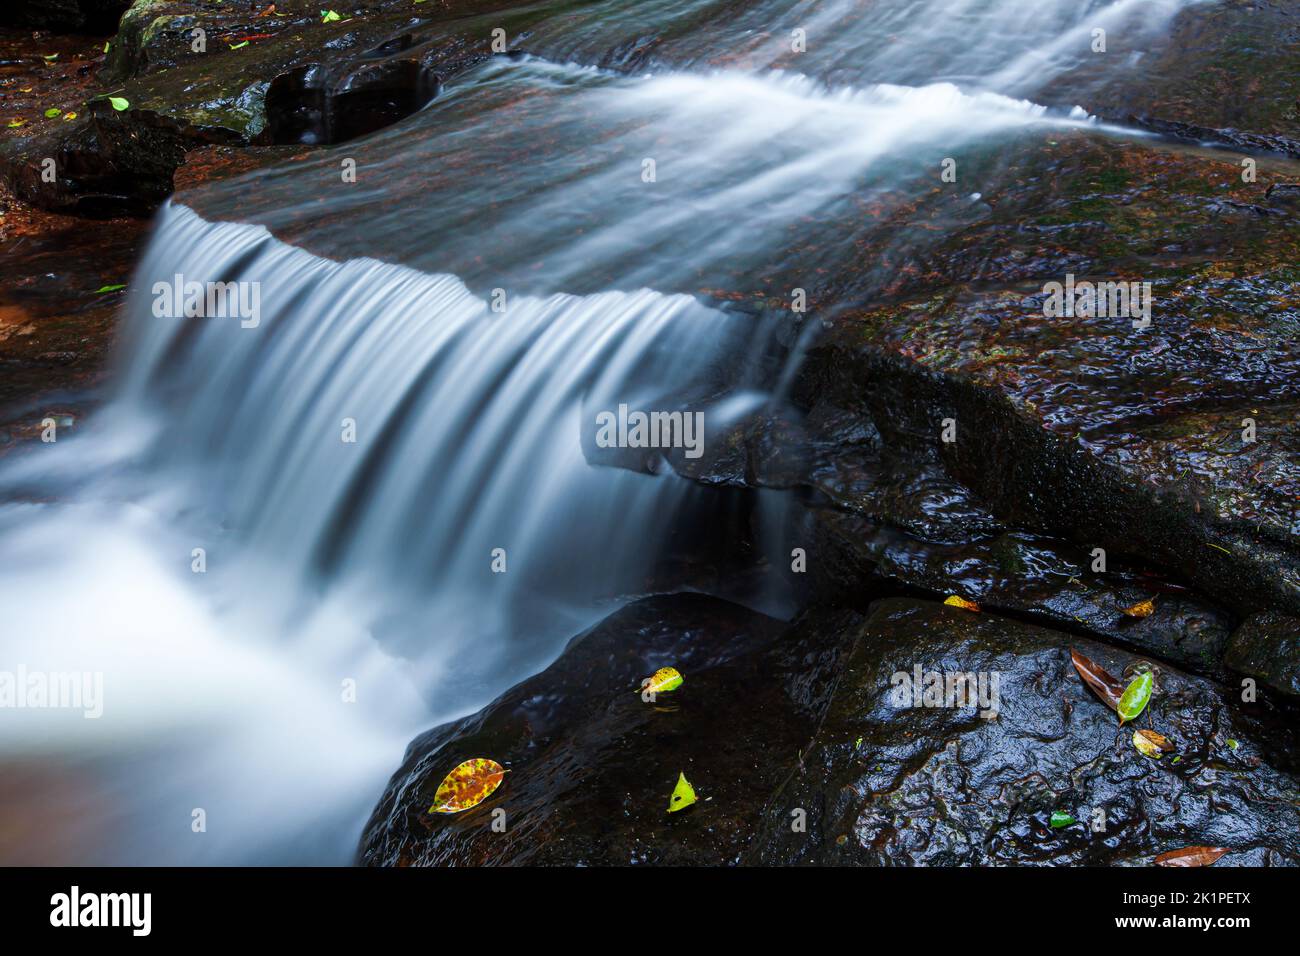 Close-up of a pure tropical waterfall in the rainy season, freshwater flowing over the edge of sedimentary sandstone, falling leaves on the rock. Stock Photo